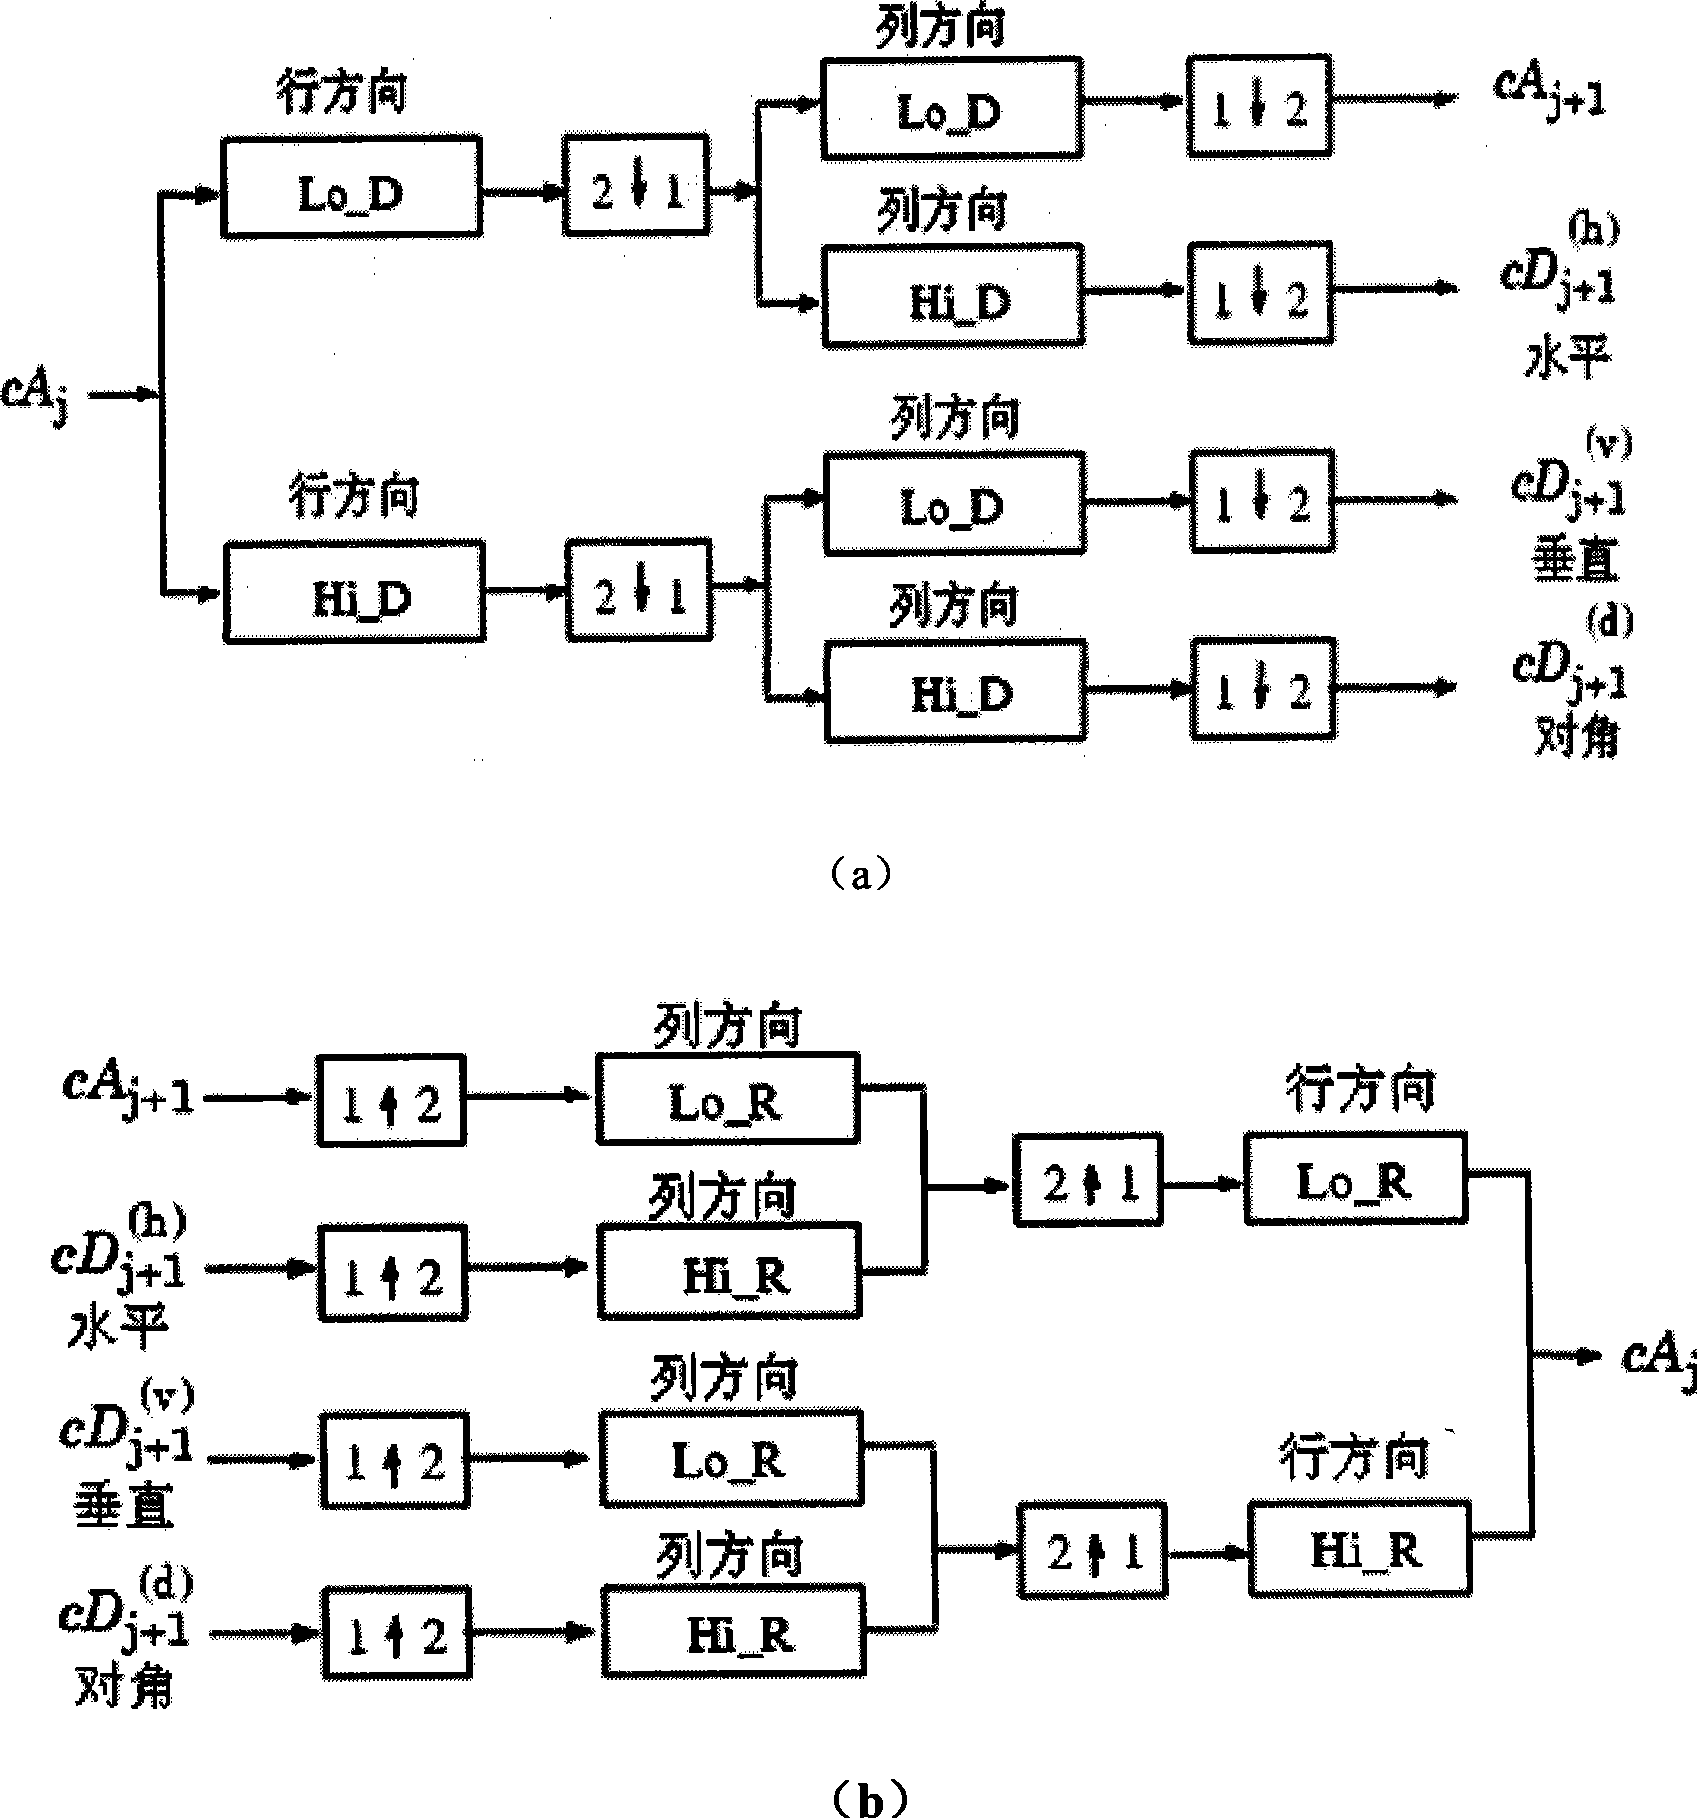 Optimized recognition pretreatment method for human face